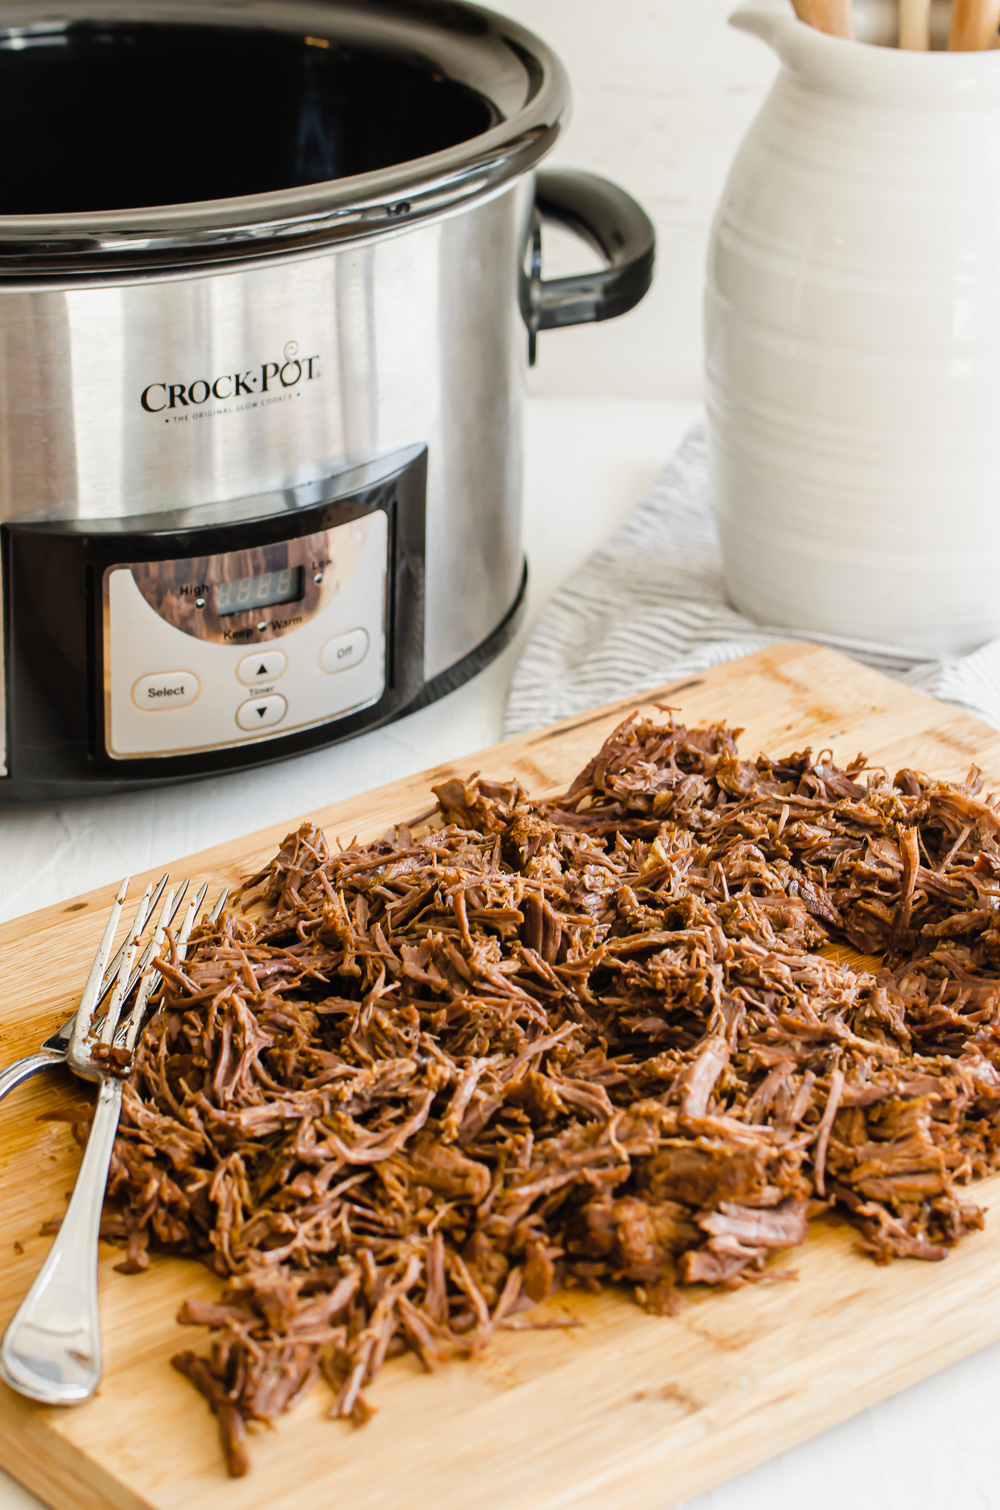 Mexican shredded beef on a wooden cutting board in front of a crockpot.